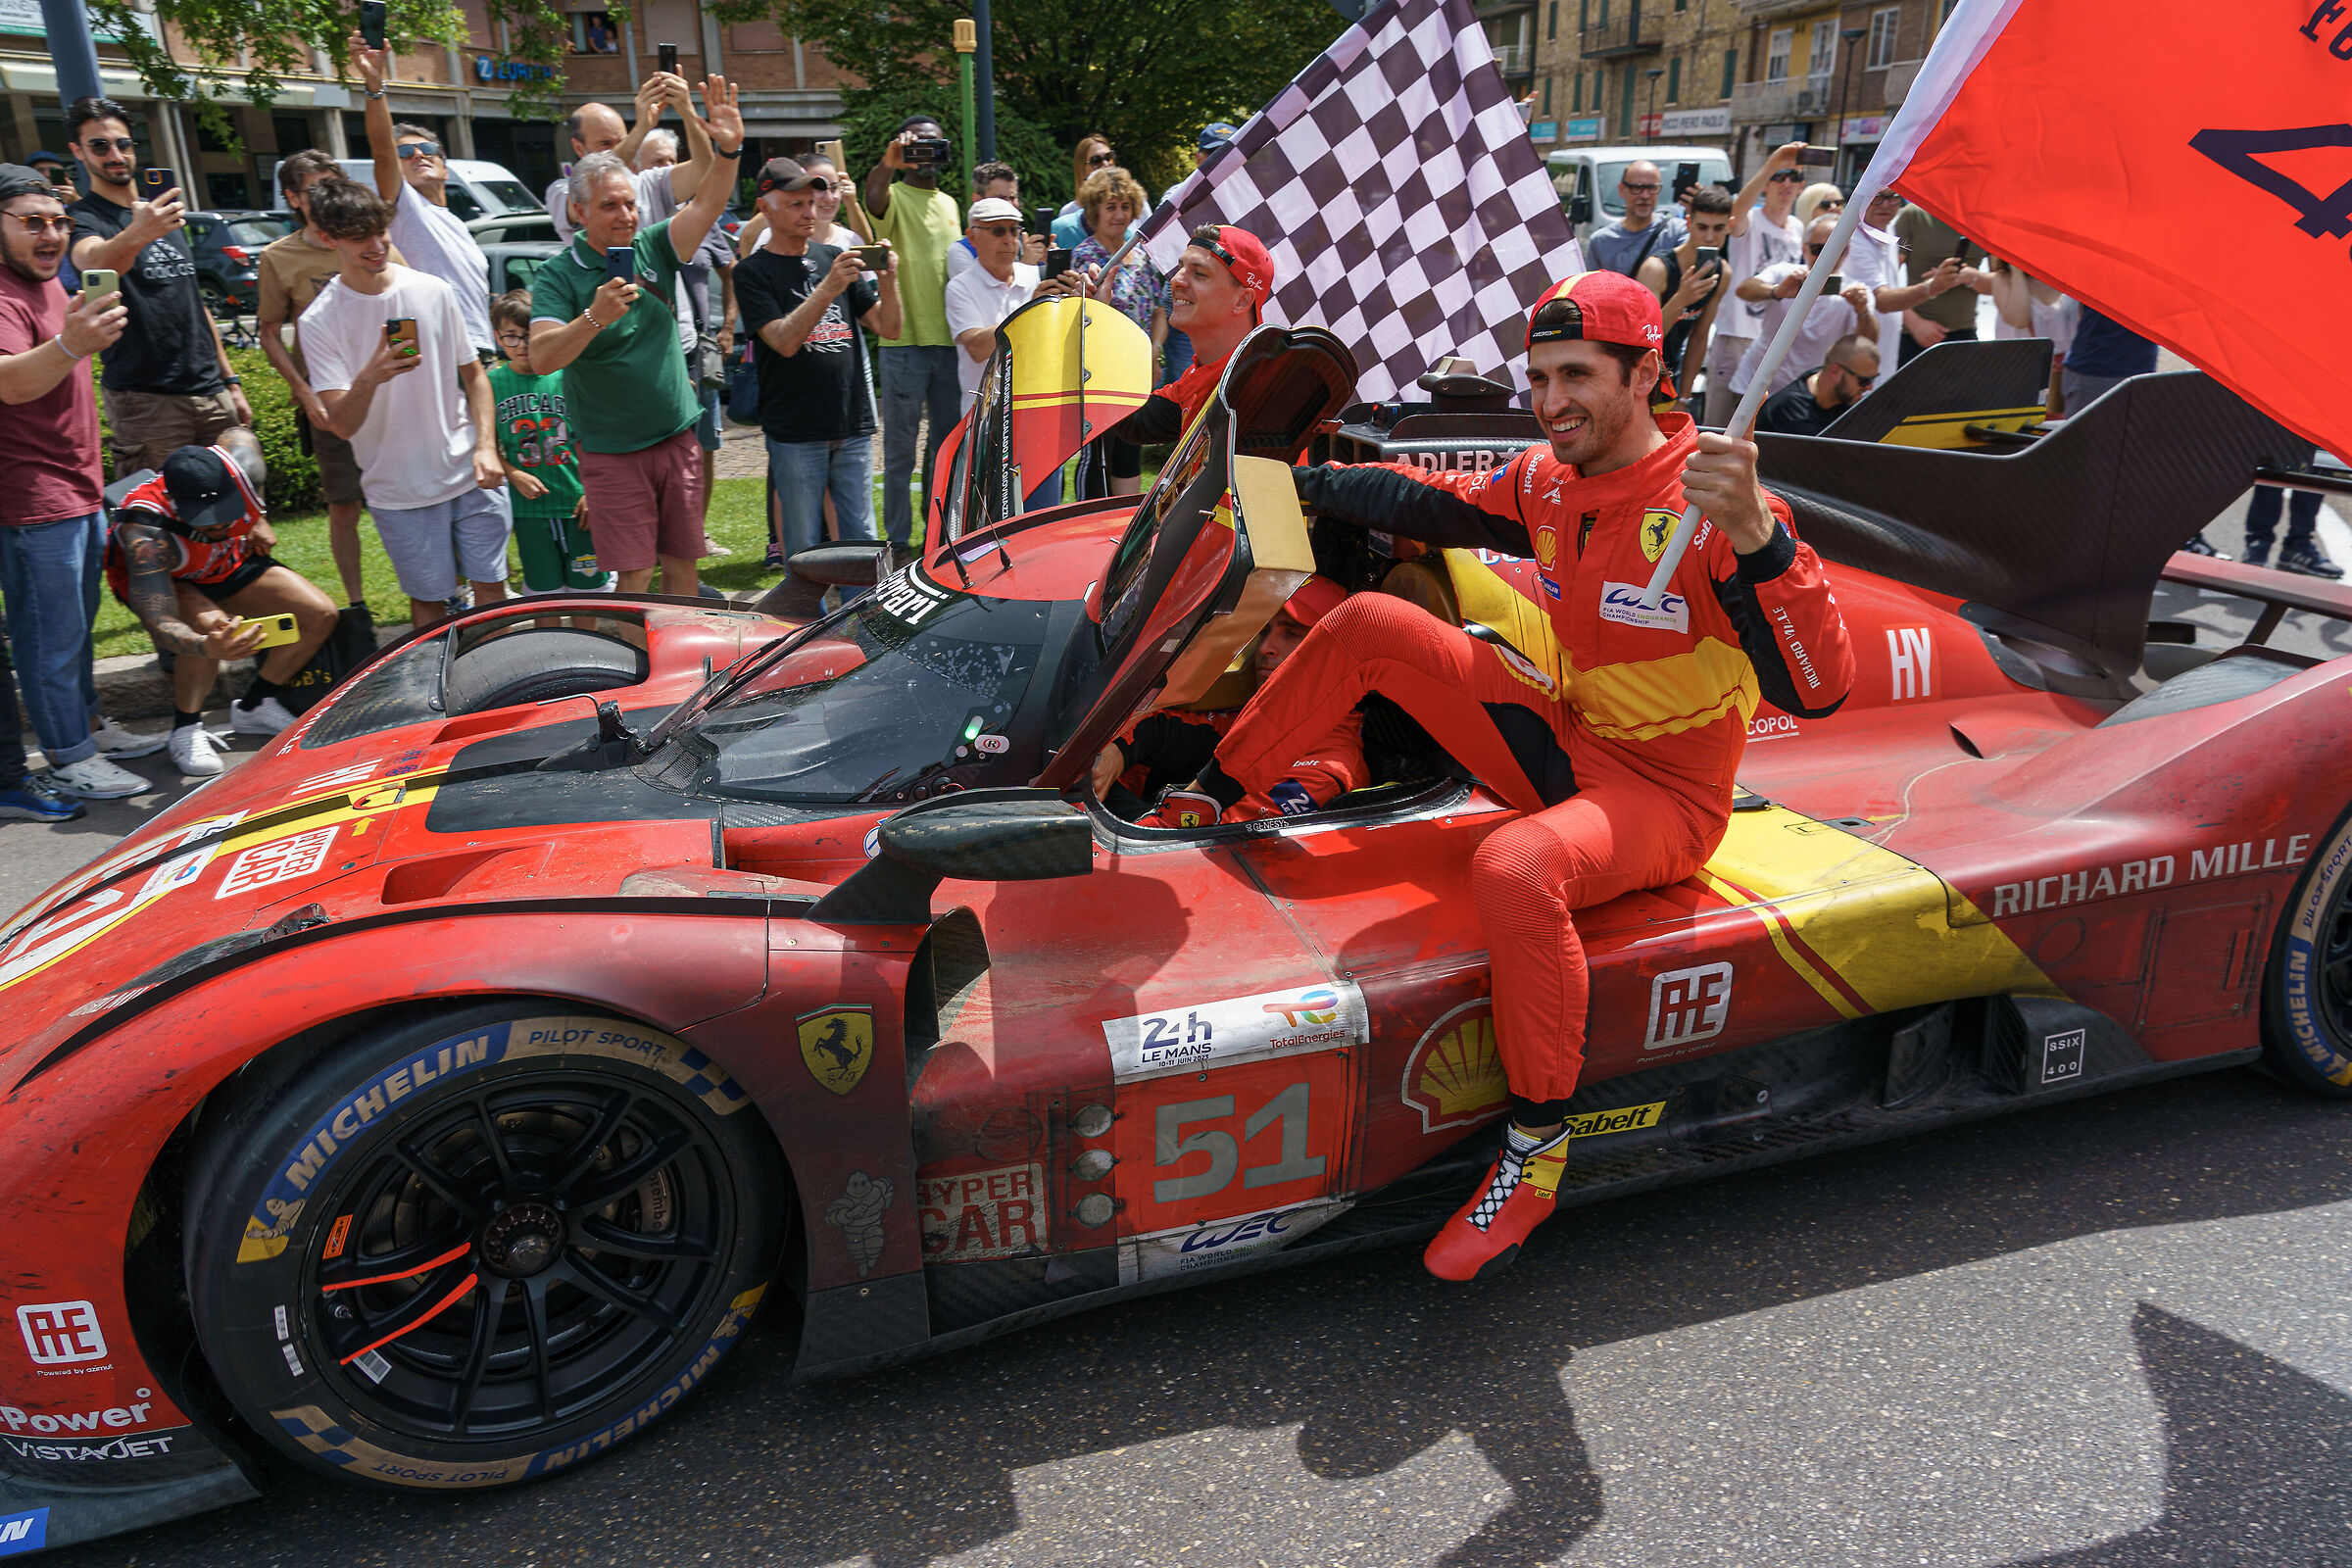 In Maranello with the winning Ferraris at Le Mans...